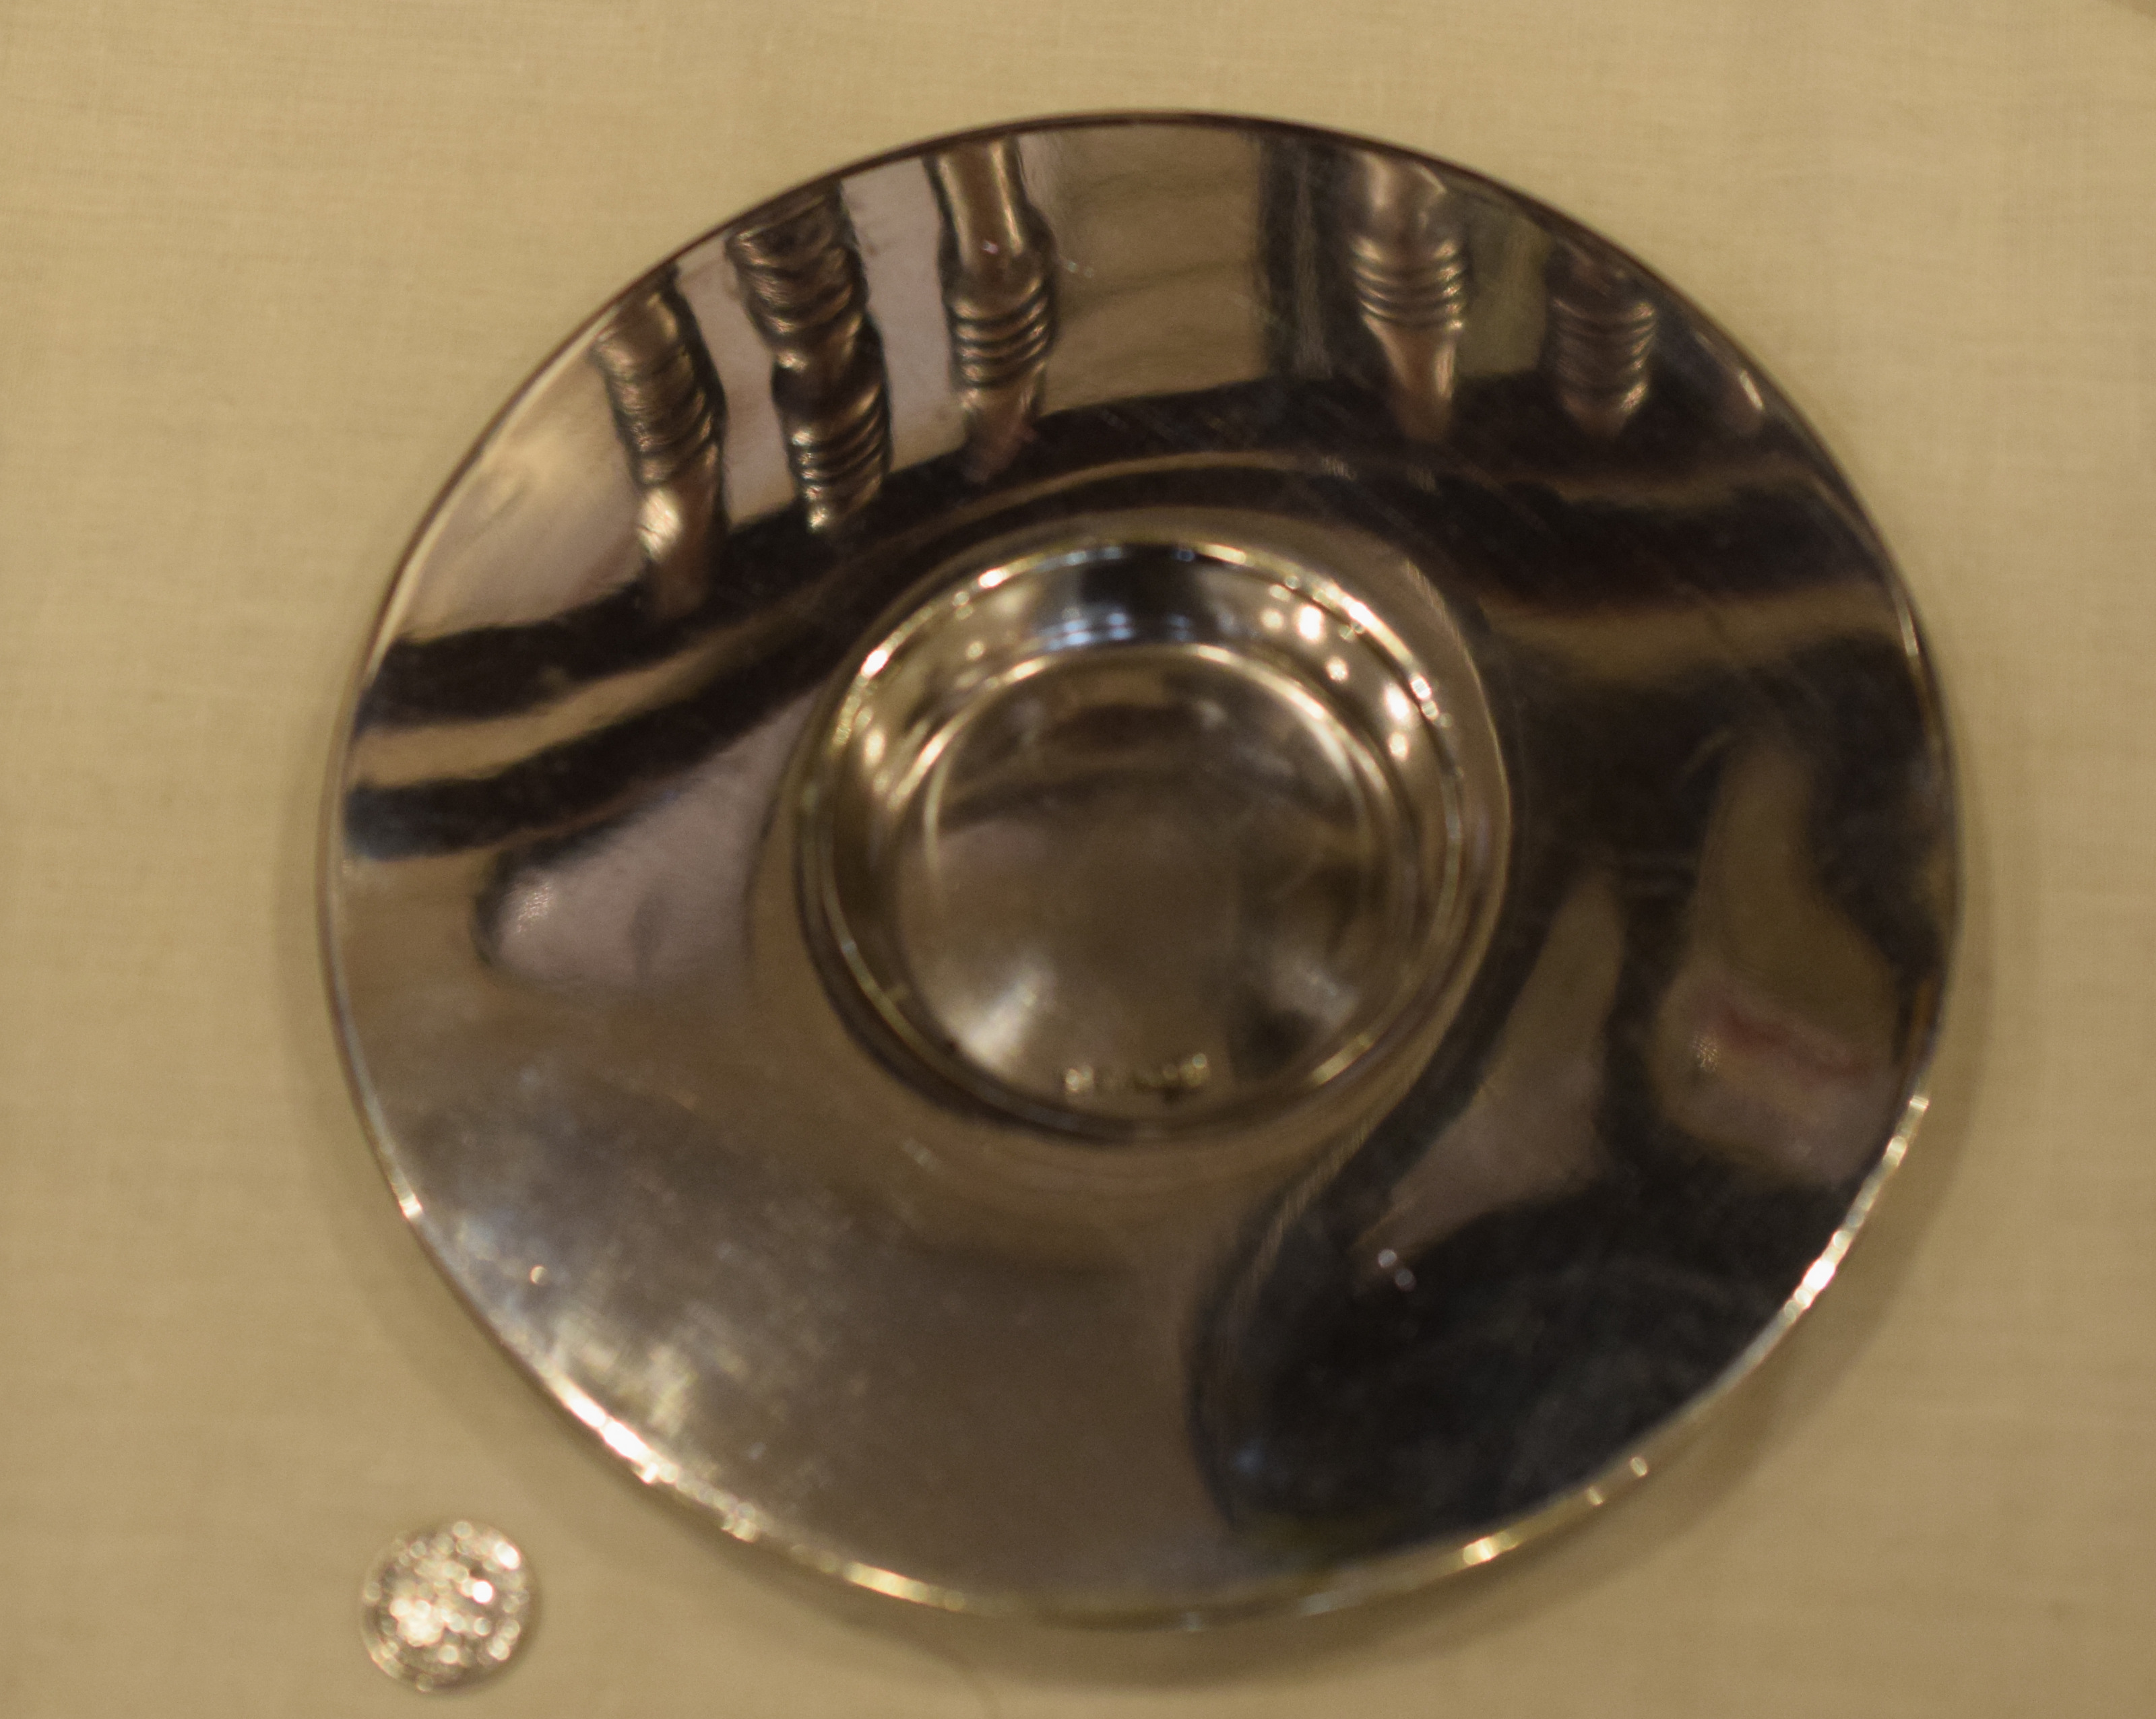 Solid Silver Recessed Plate With Rat Hallmark For Paisley NO RESERVE - Image 4 of 5